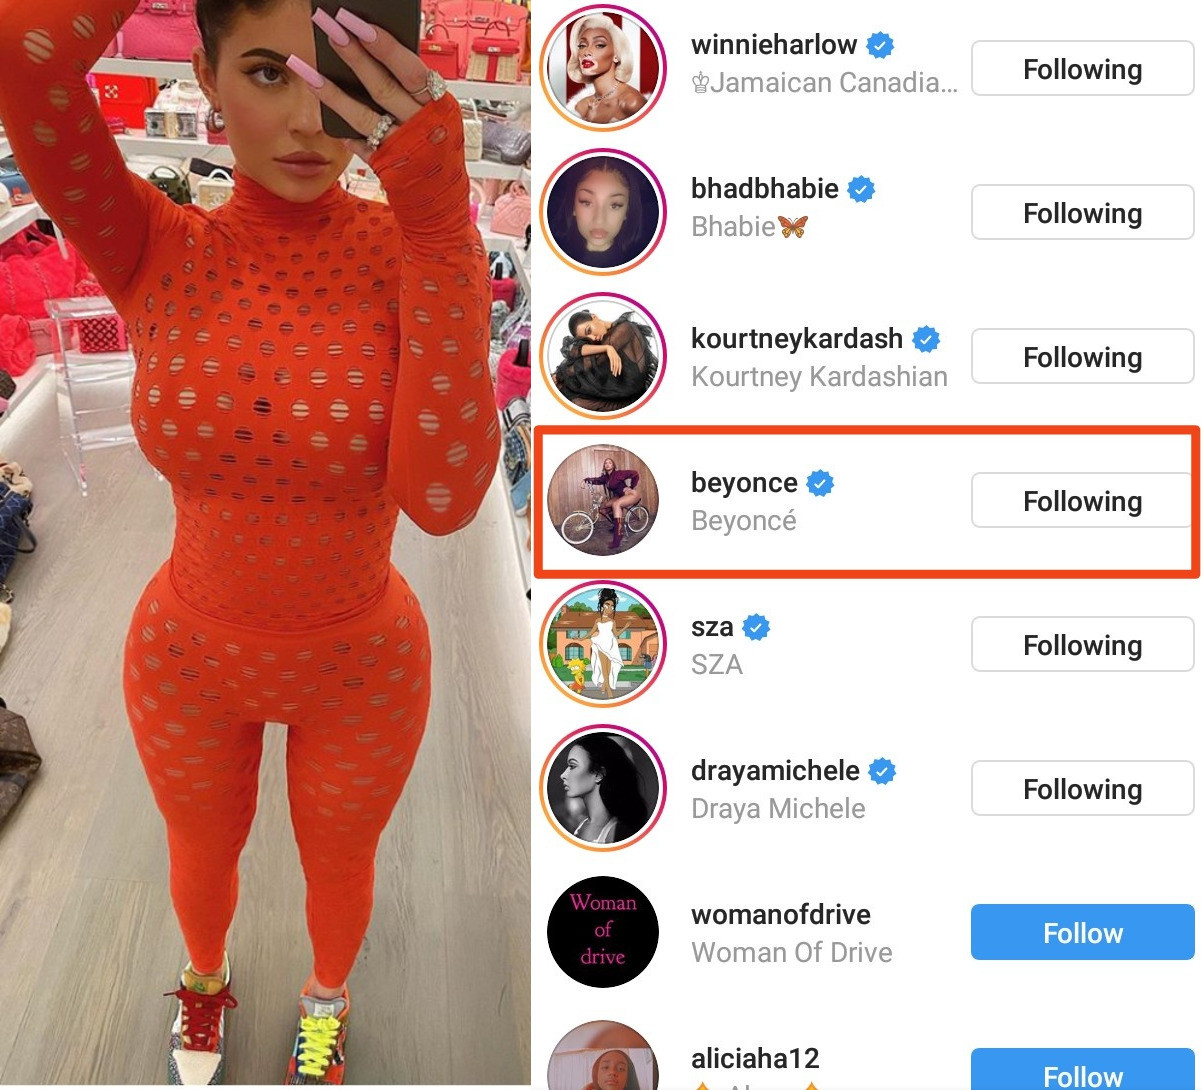 Beyonce liked Kylie Jenner's latest photo